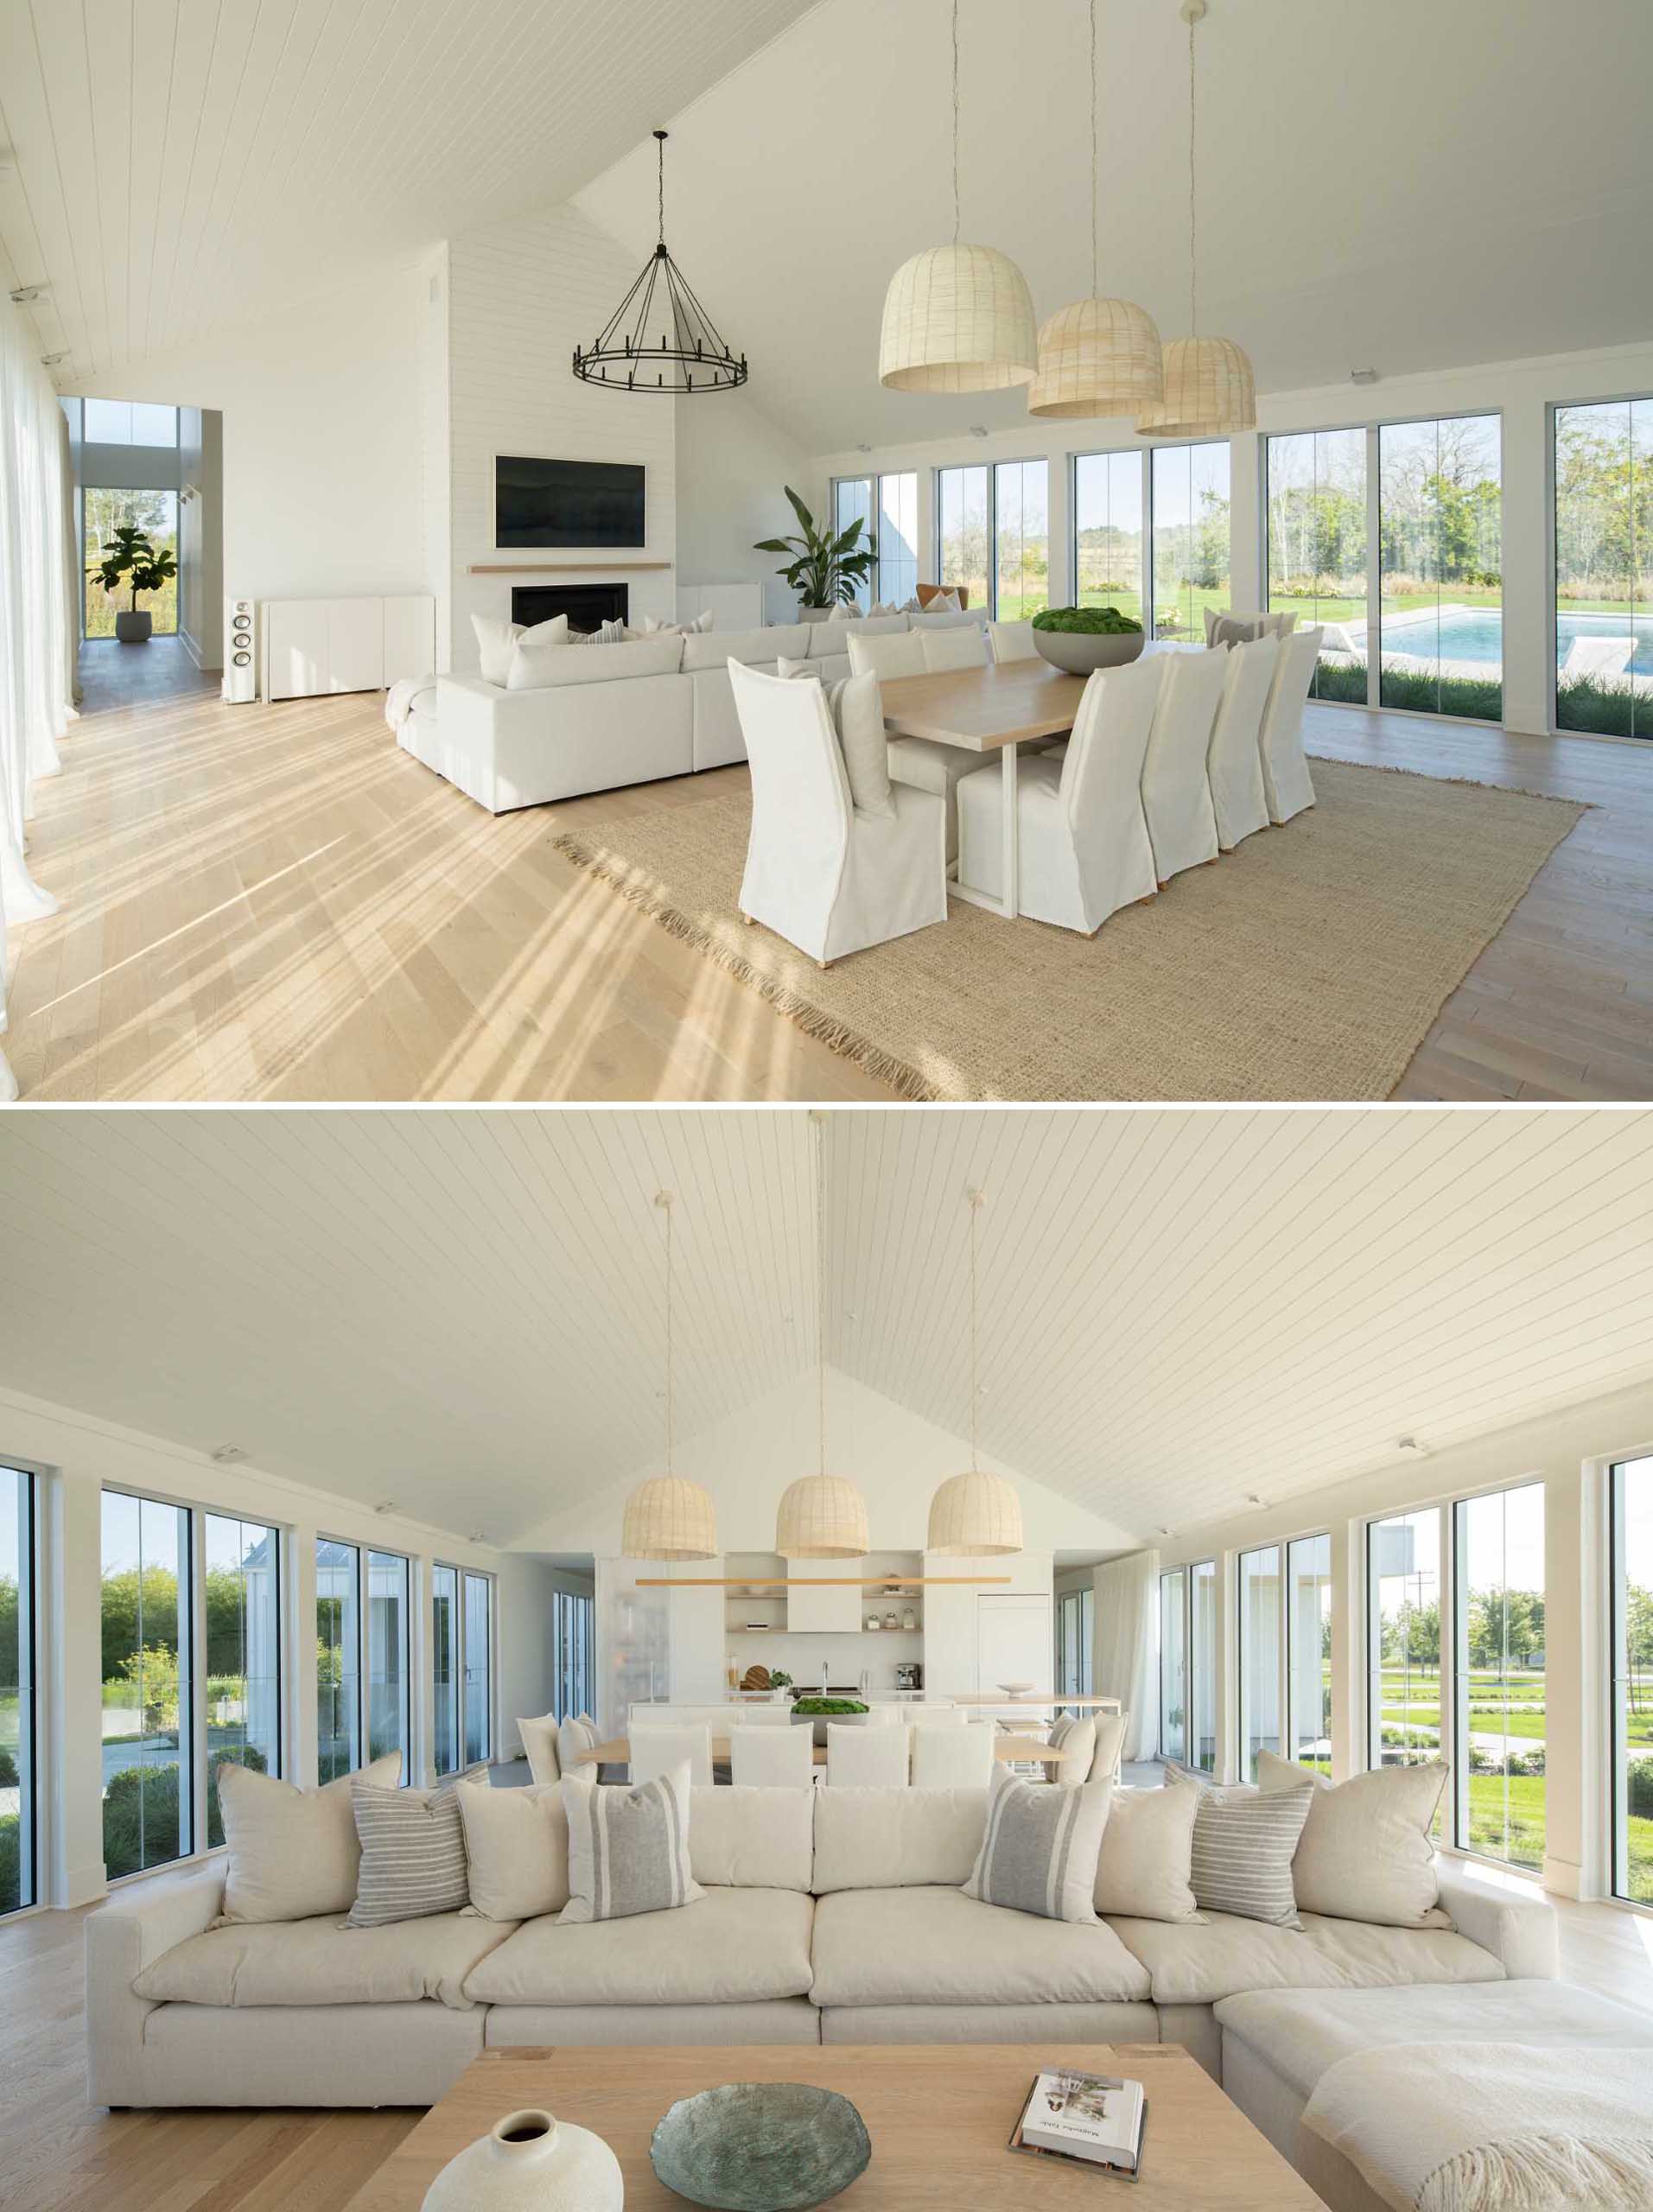 A contemporary interior with a white interior that complements the white exterior.